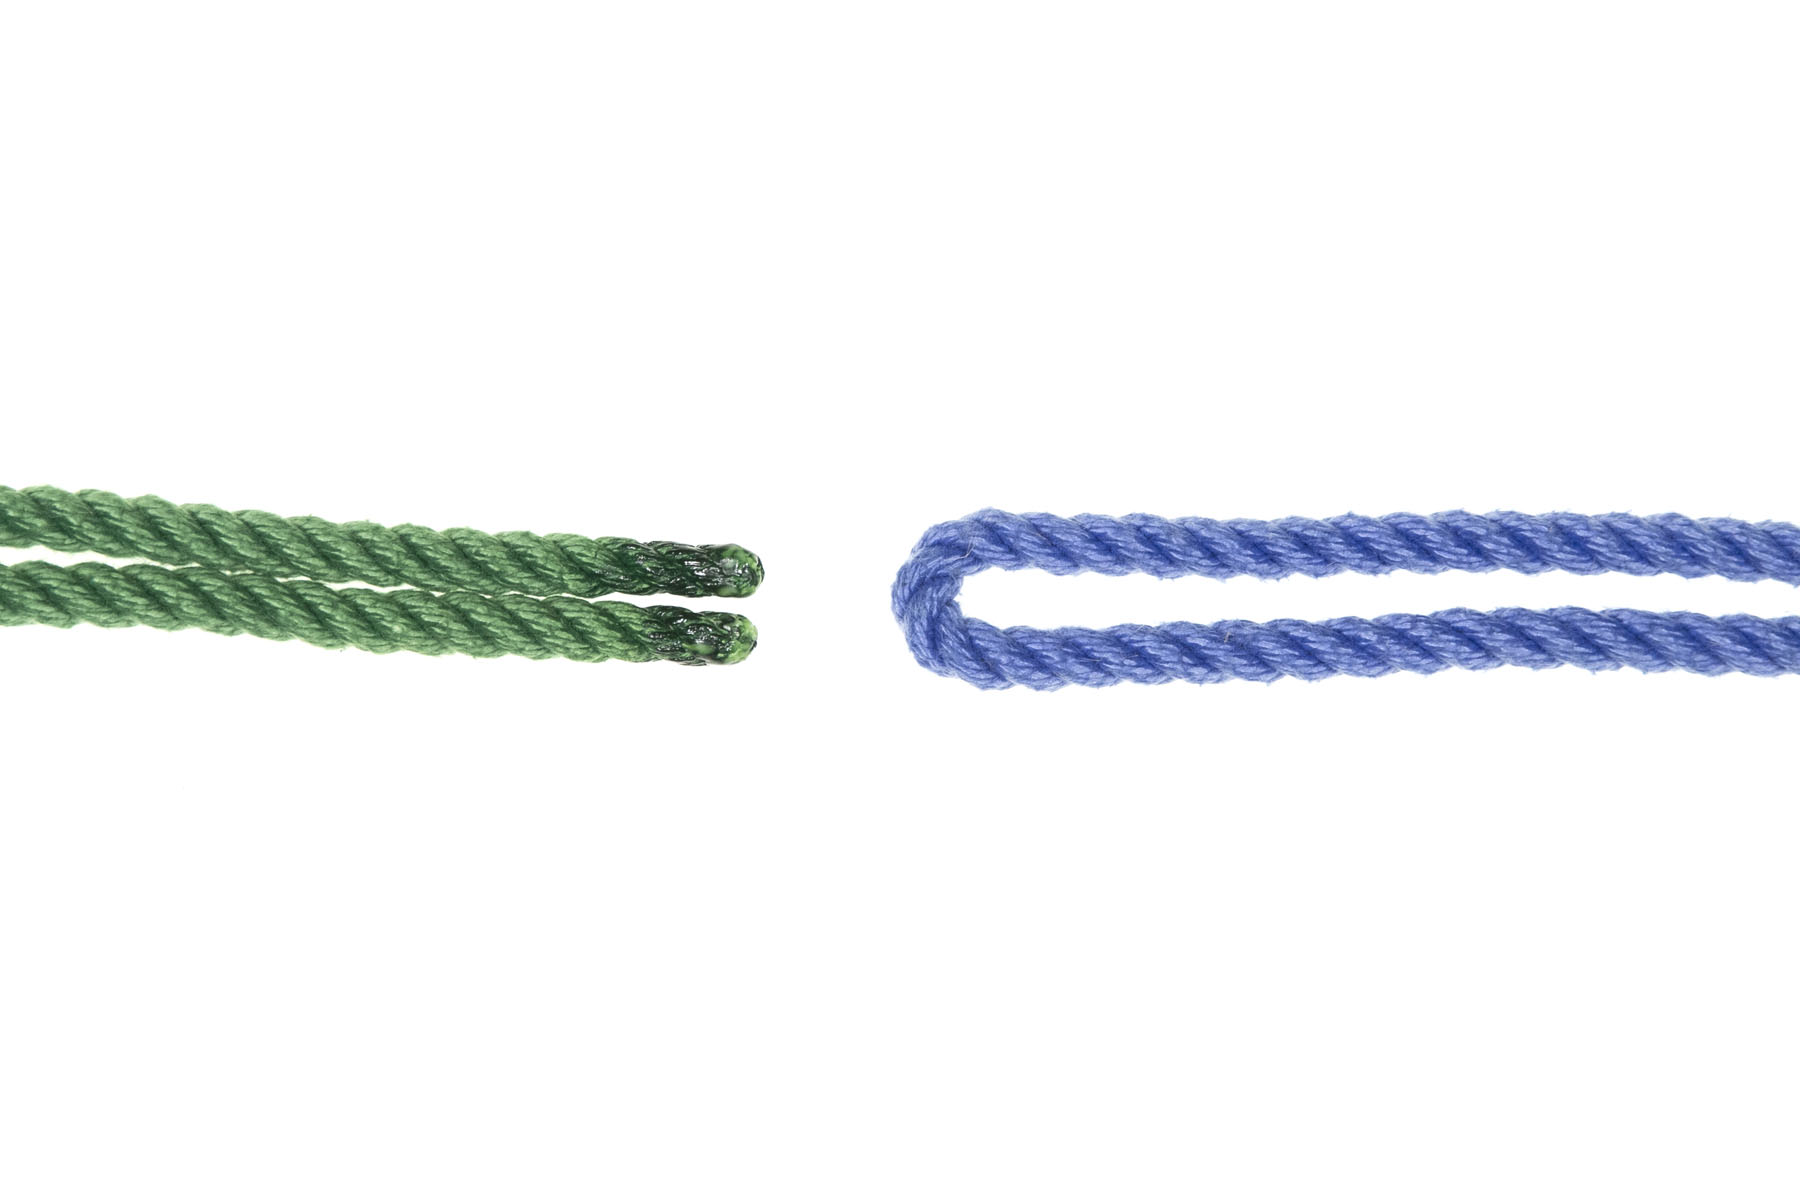 Two ends of a doubled green rope enter from the left. The bight of a blue rope enters from the right.